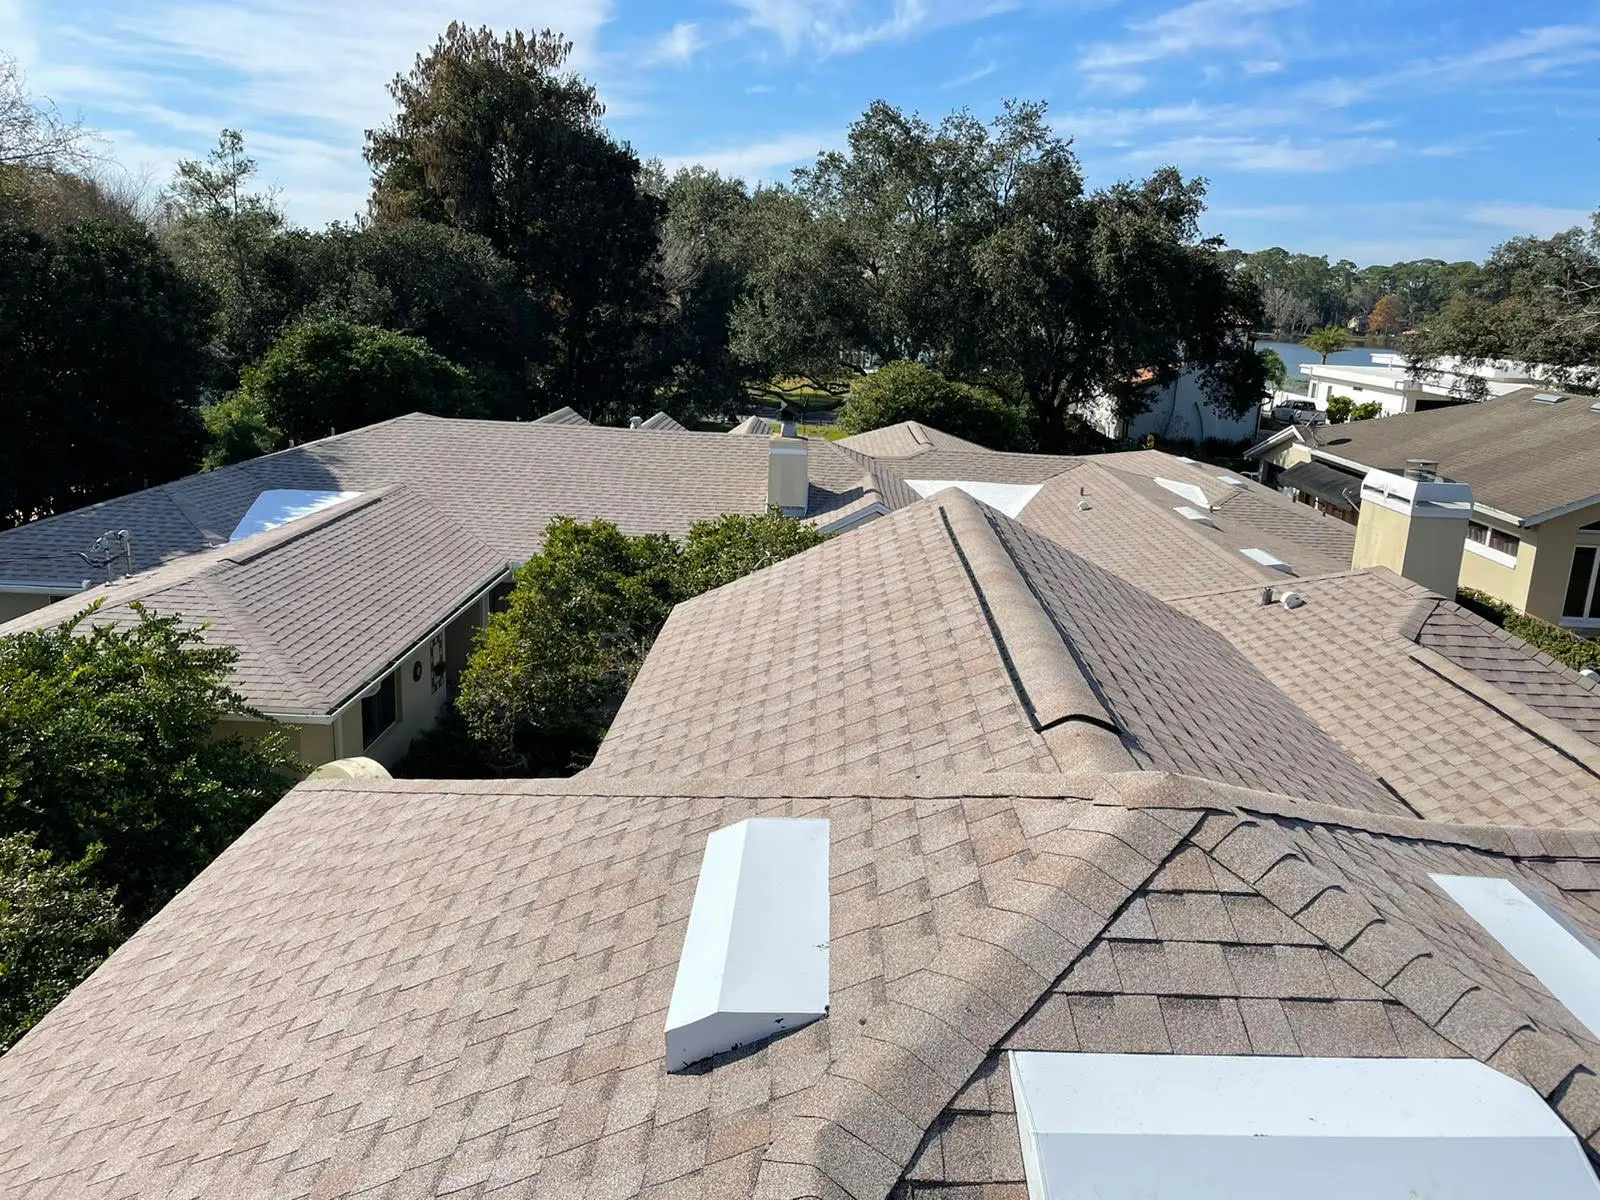 roof repair services - Expert Roof Repair Services, Protect Your Home and Wallet